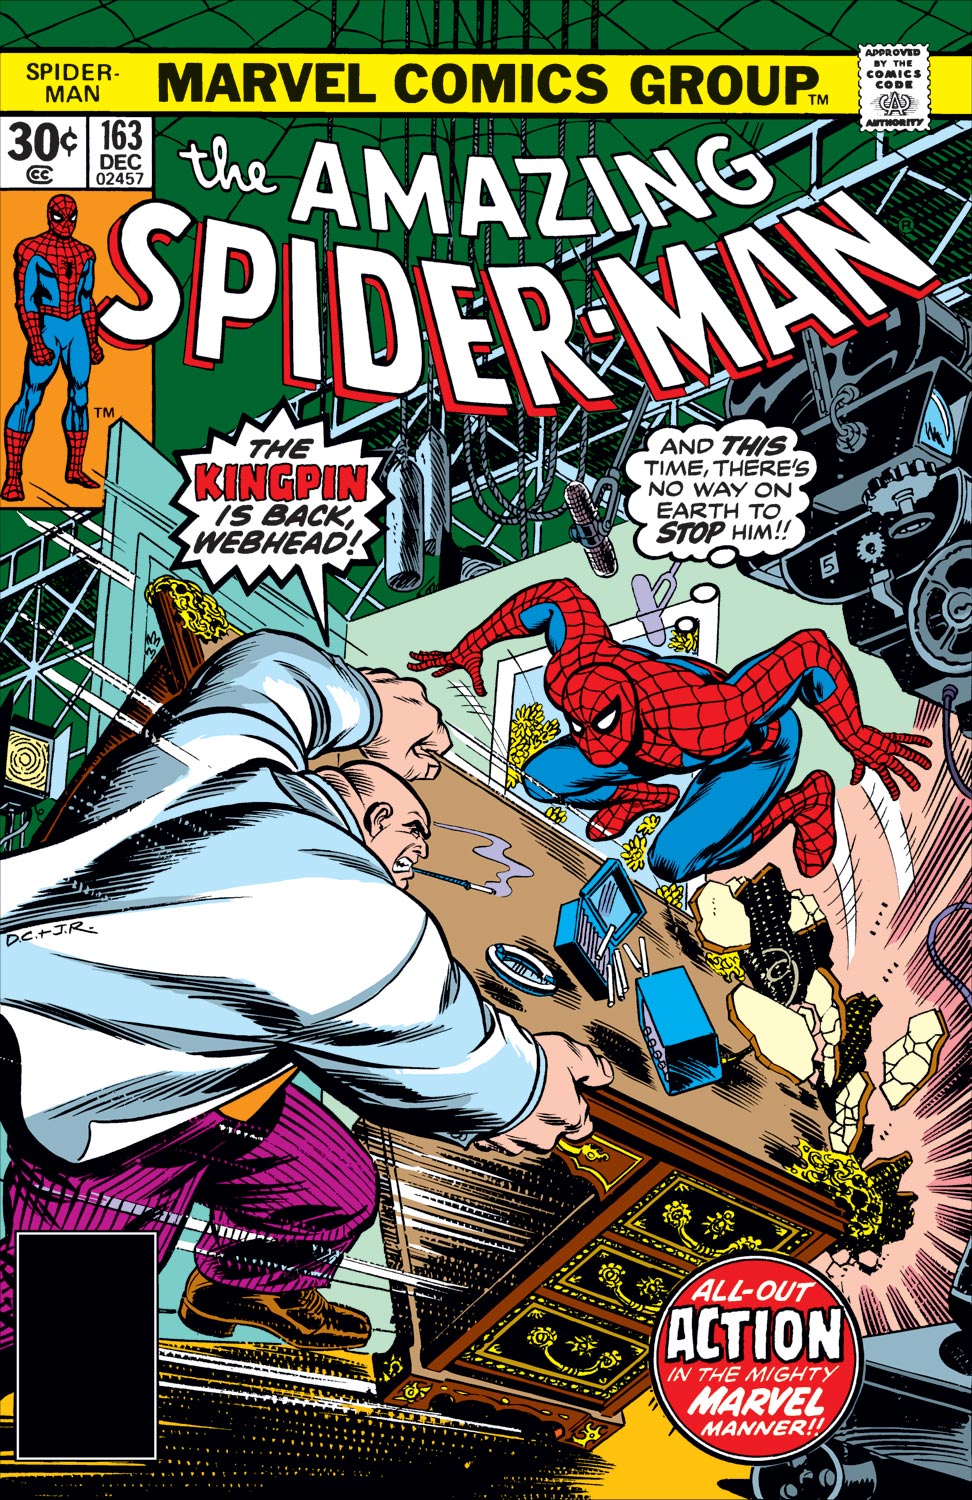 The Amazing Spider-Man (1963) #163 | Comic Issues | Marvel